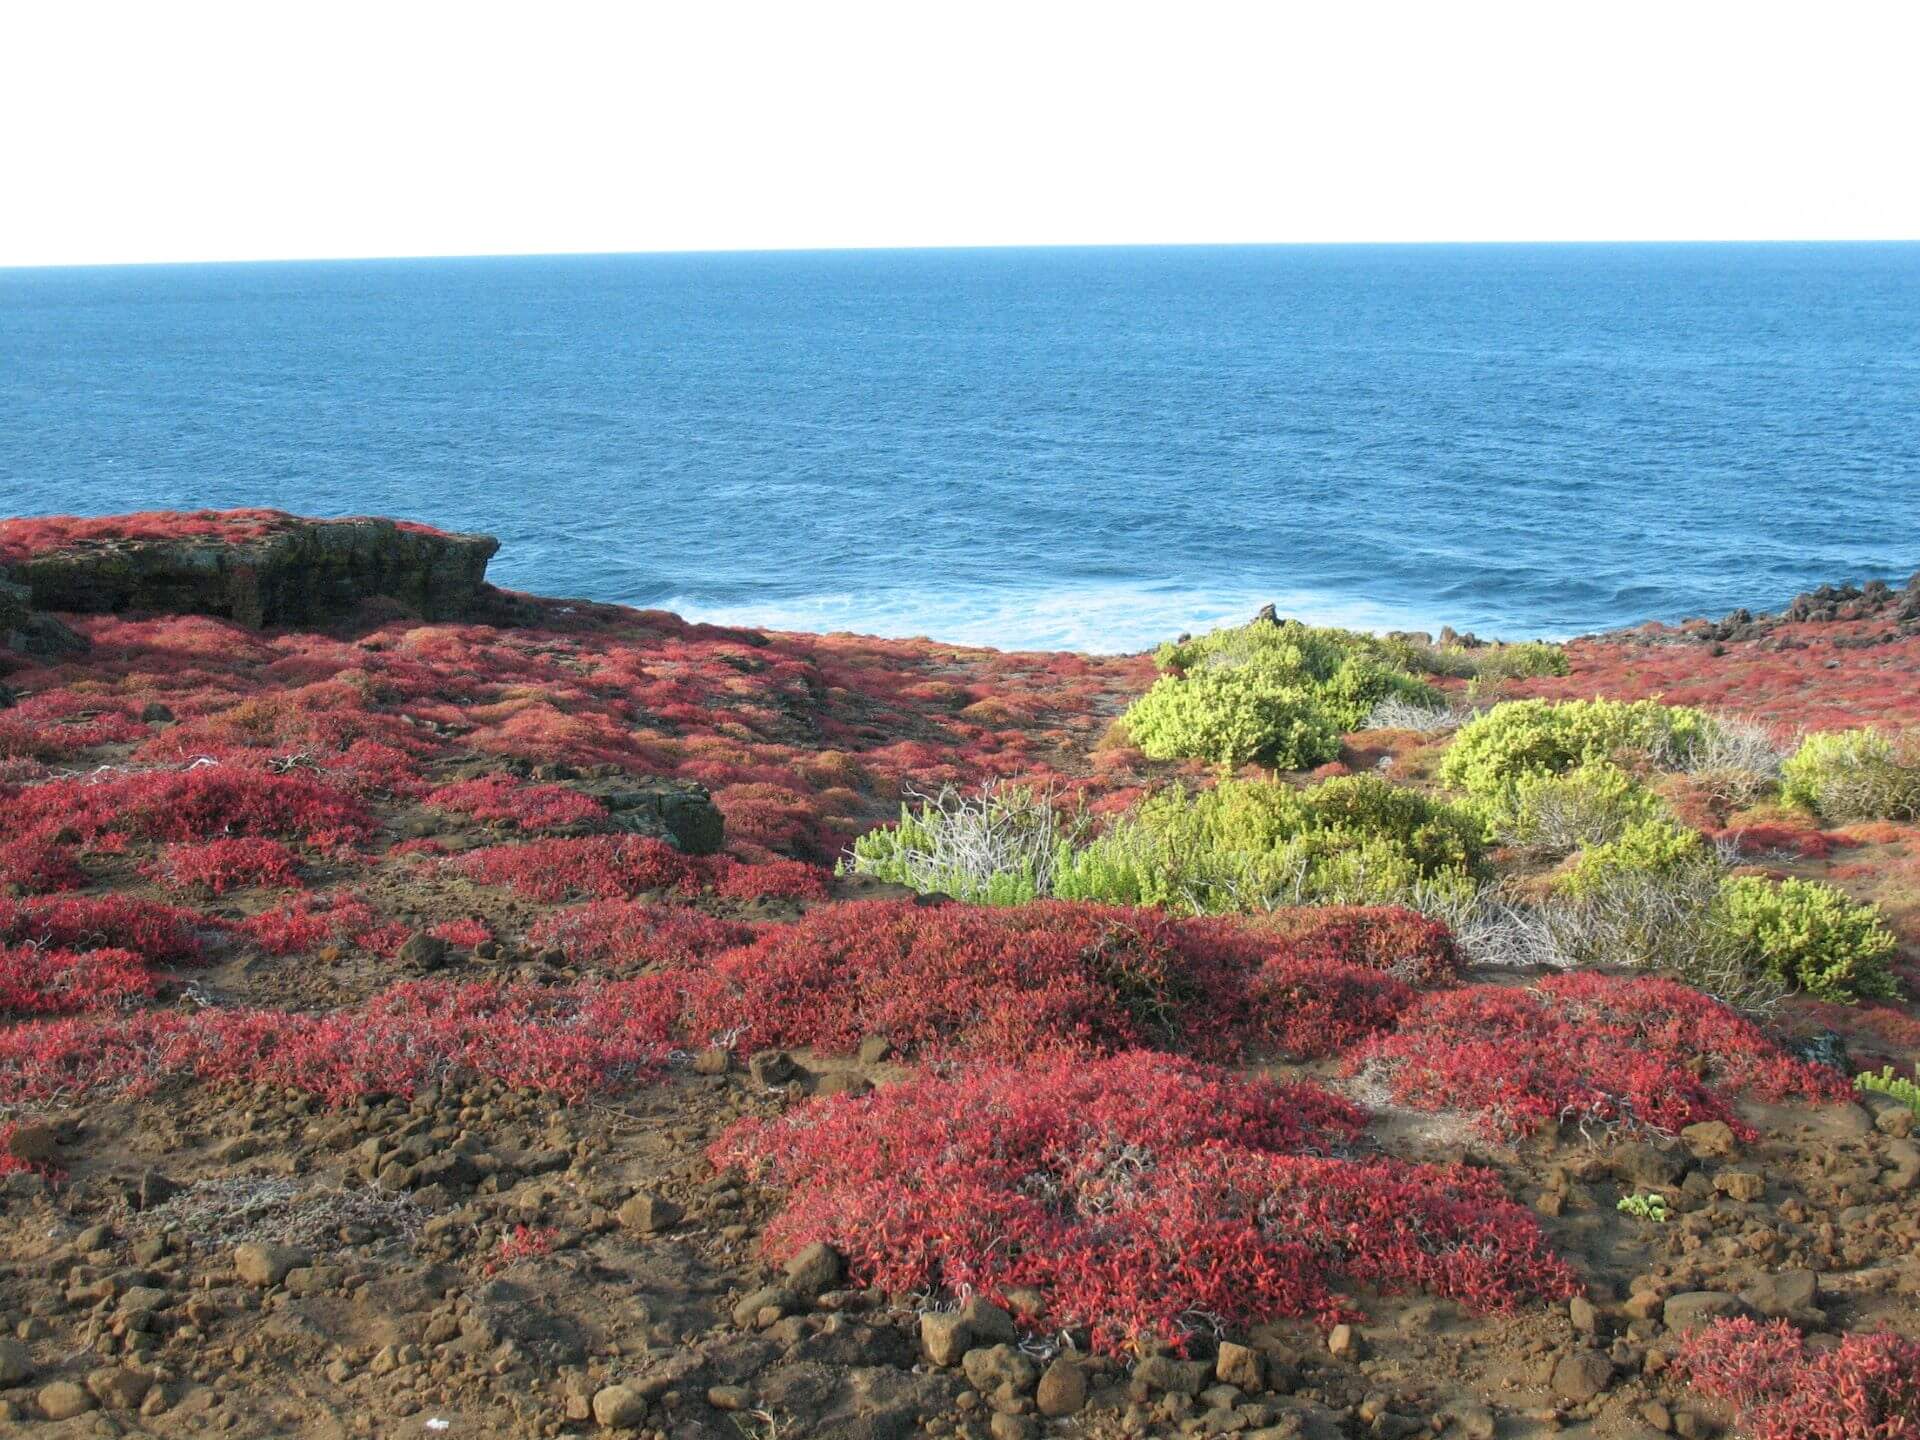 Vibrant red and green vegetation on the rocky coastline of the Galápagos Islands